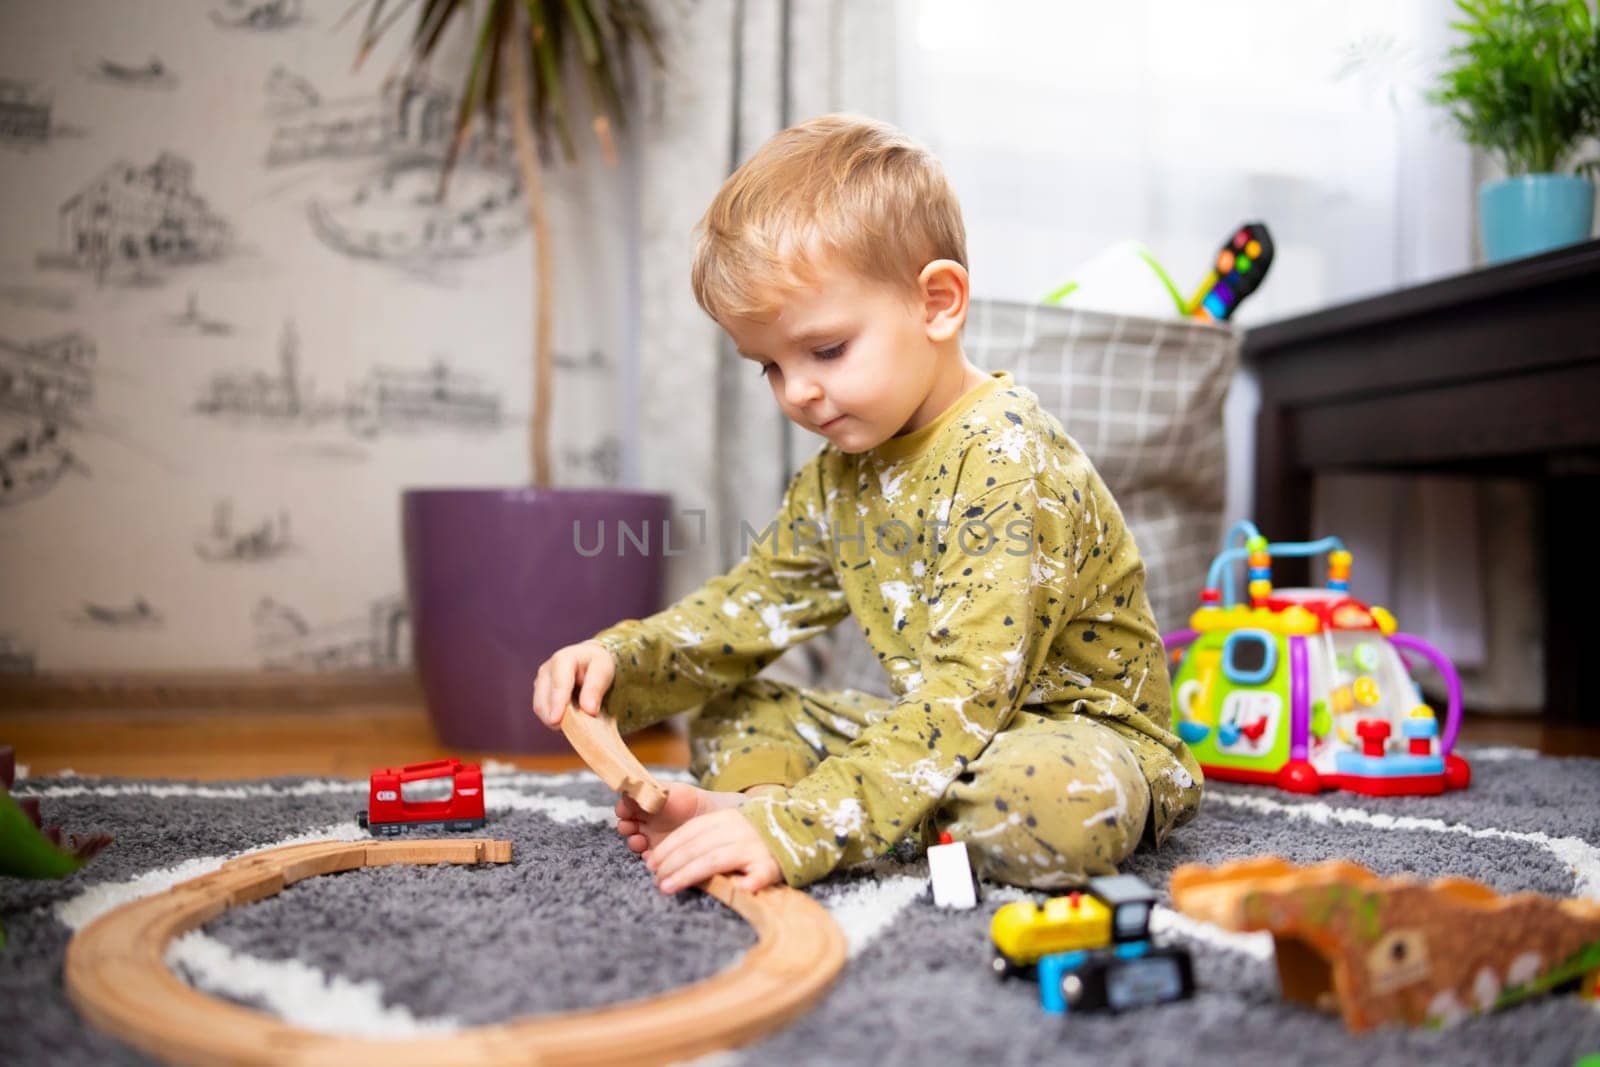 Child playing with developmental toys. Baby playing with toy railroad, trains and cars on the floor. Children at home or in kindergarten